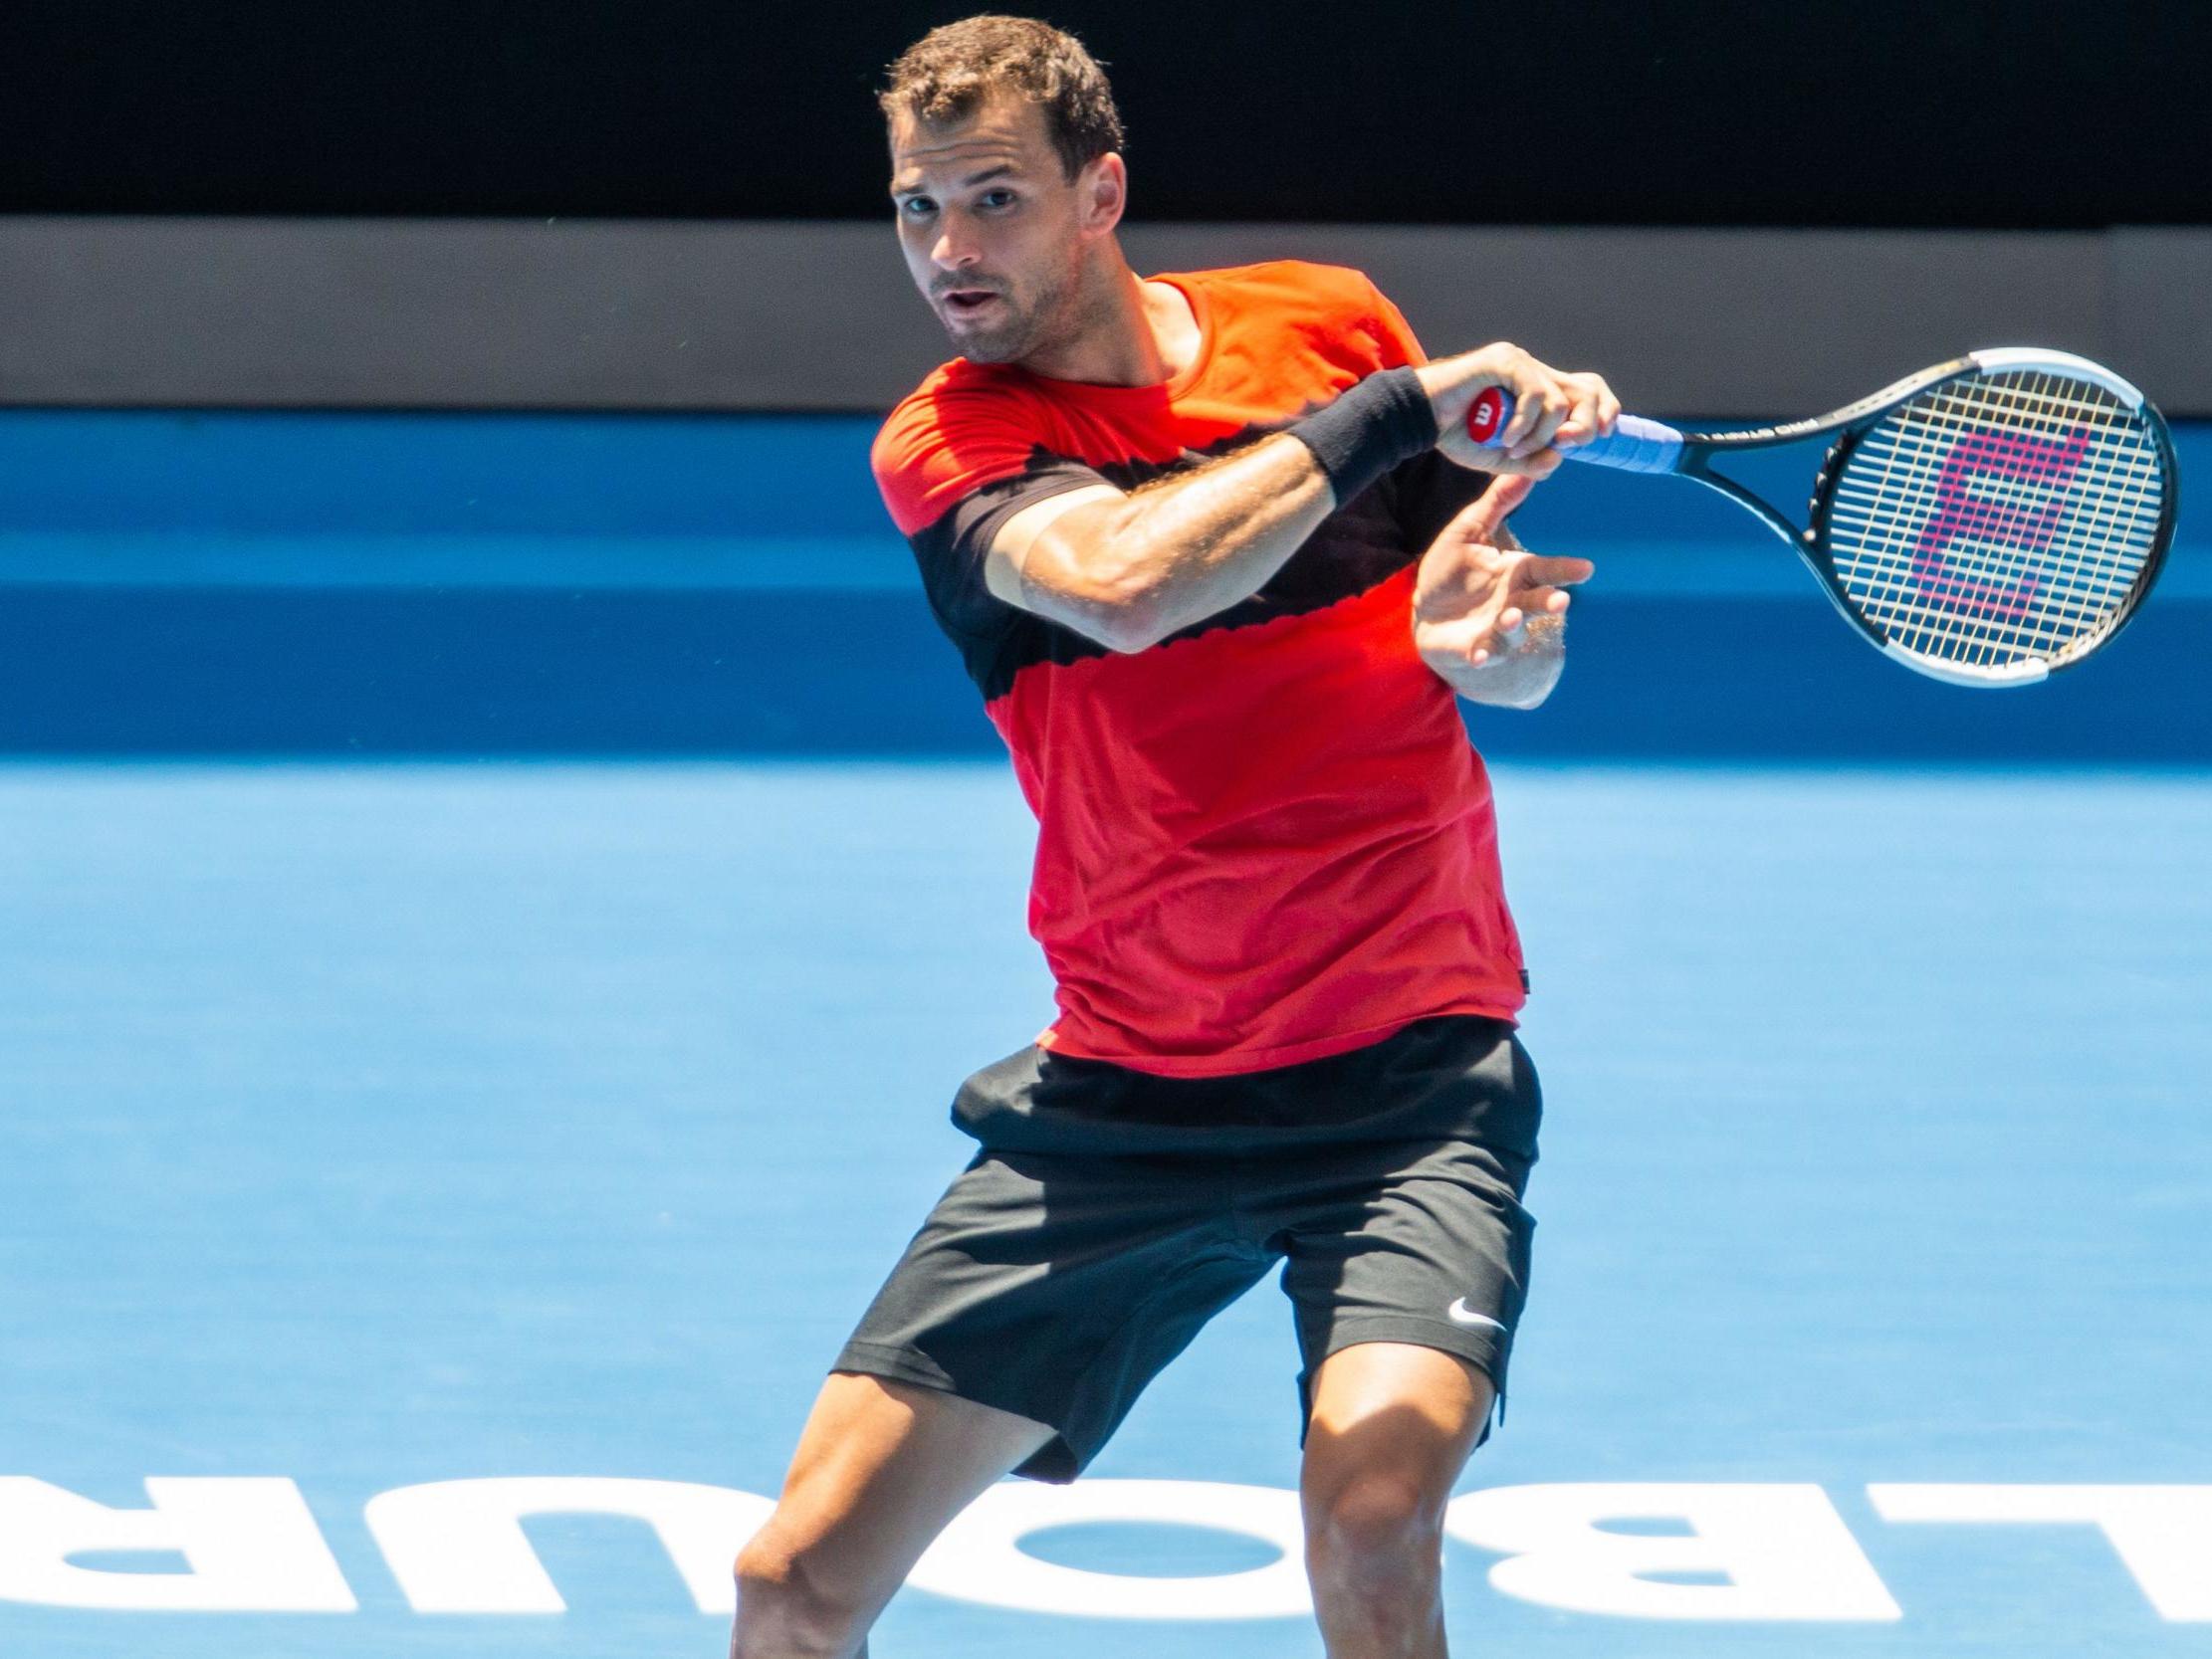 Dimitrov plays a forehand shot during a practice session in Melbourne